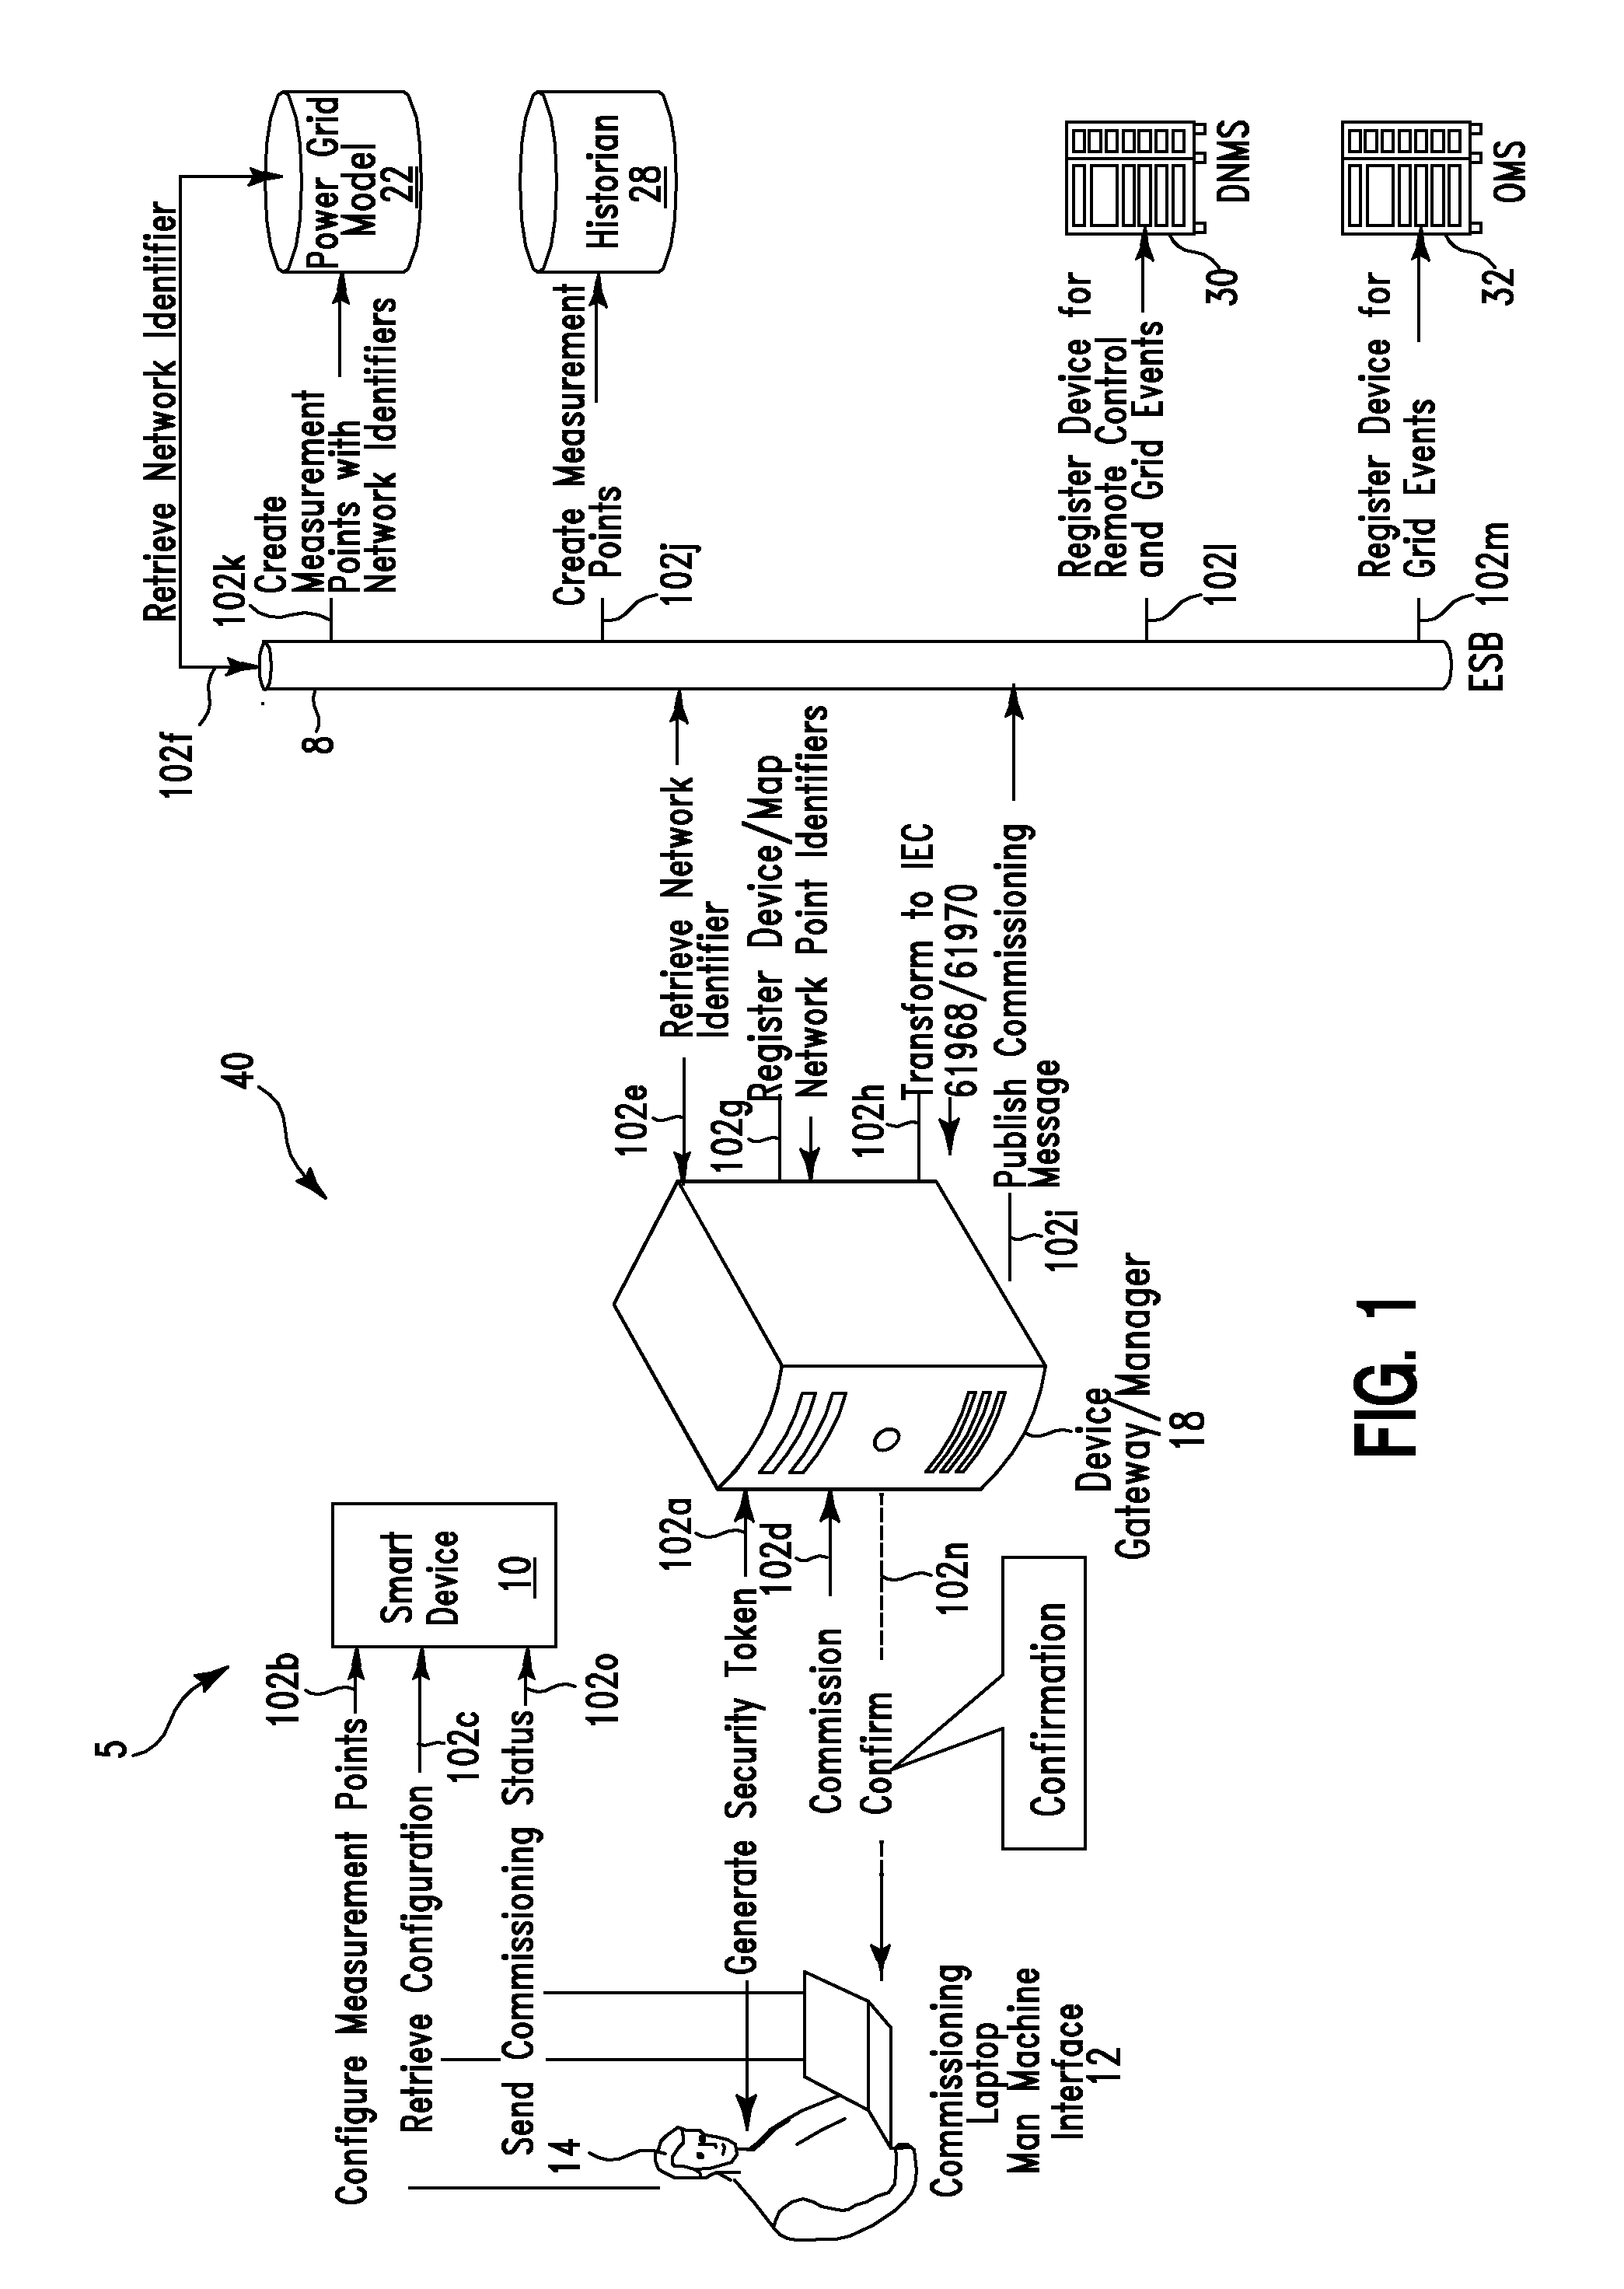 Energy grid device commissioning method and system